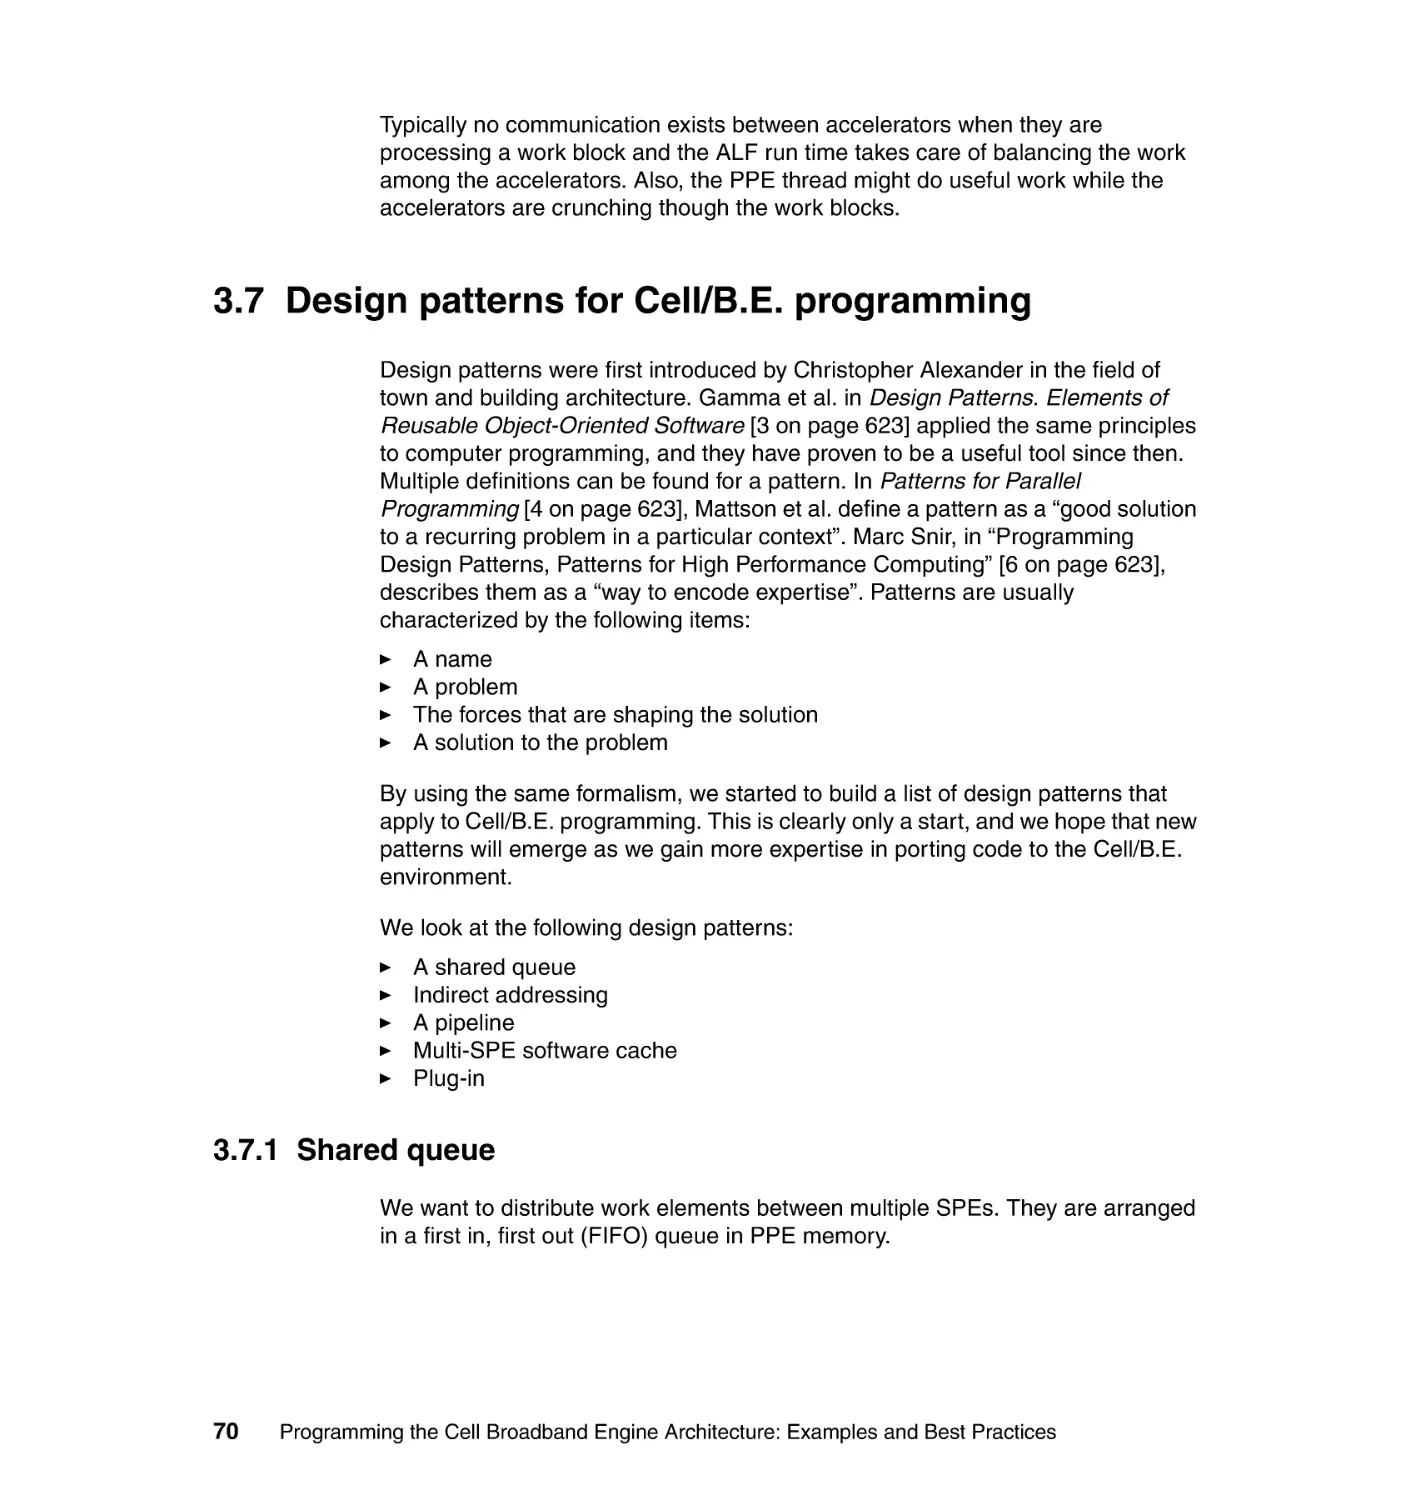 3.7 Design patterns for Cell/B.E. programming
3.7.1 Shared queue